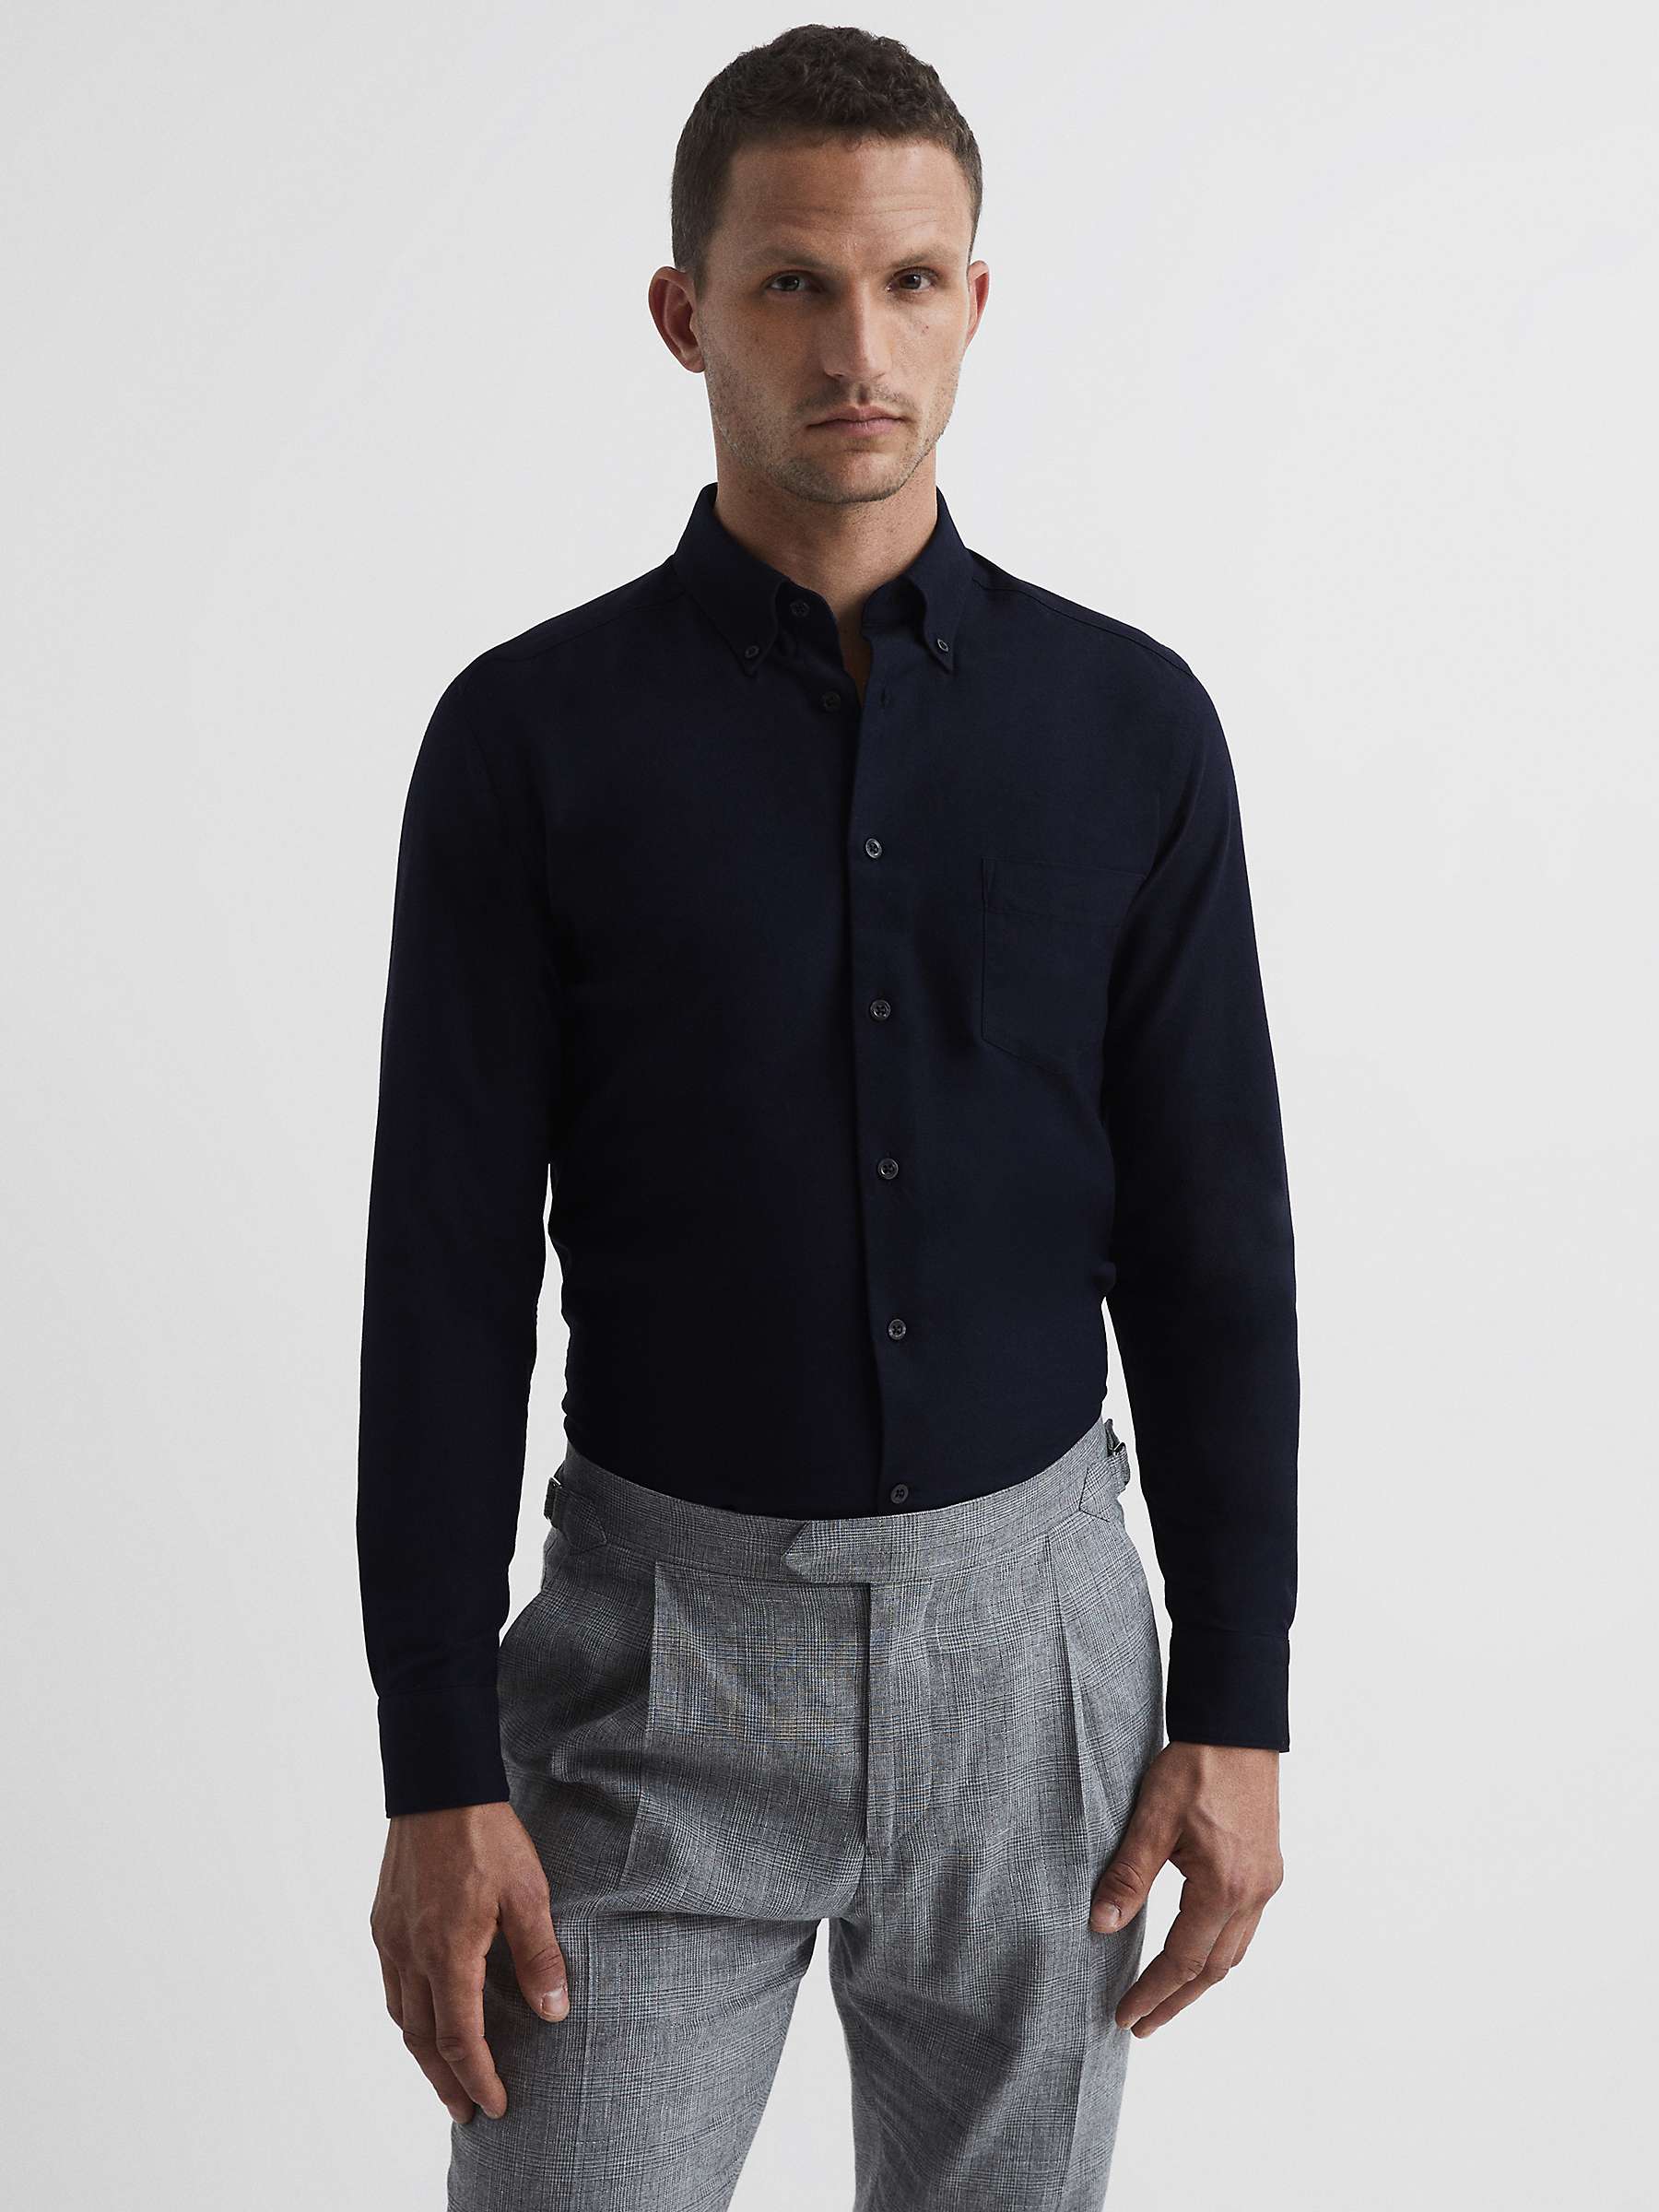 Buy Reiss Greenwich Casual Oxford Shirt, Navy Online at johnlewis.com